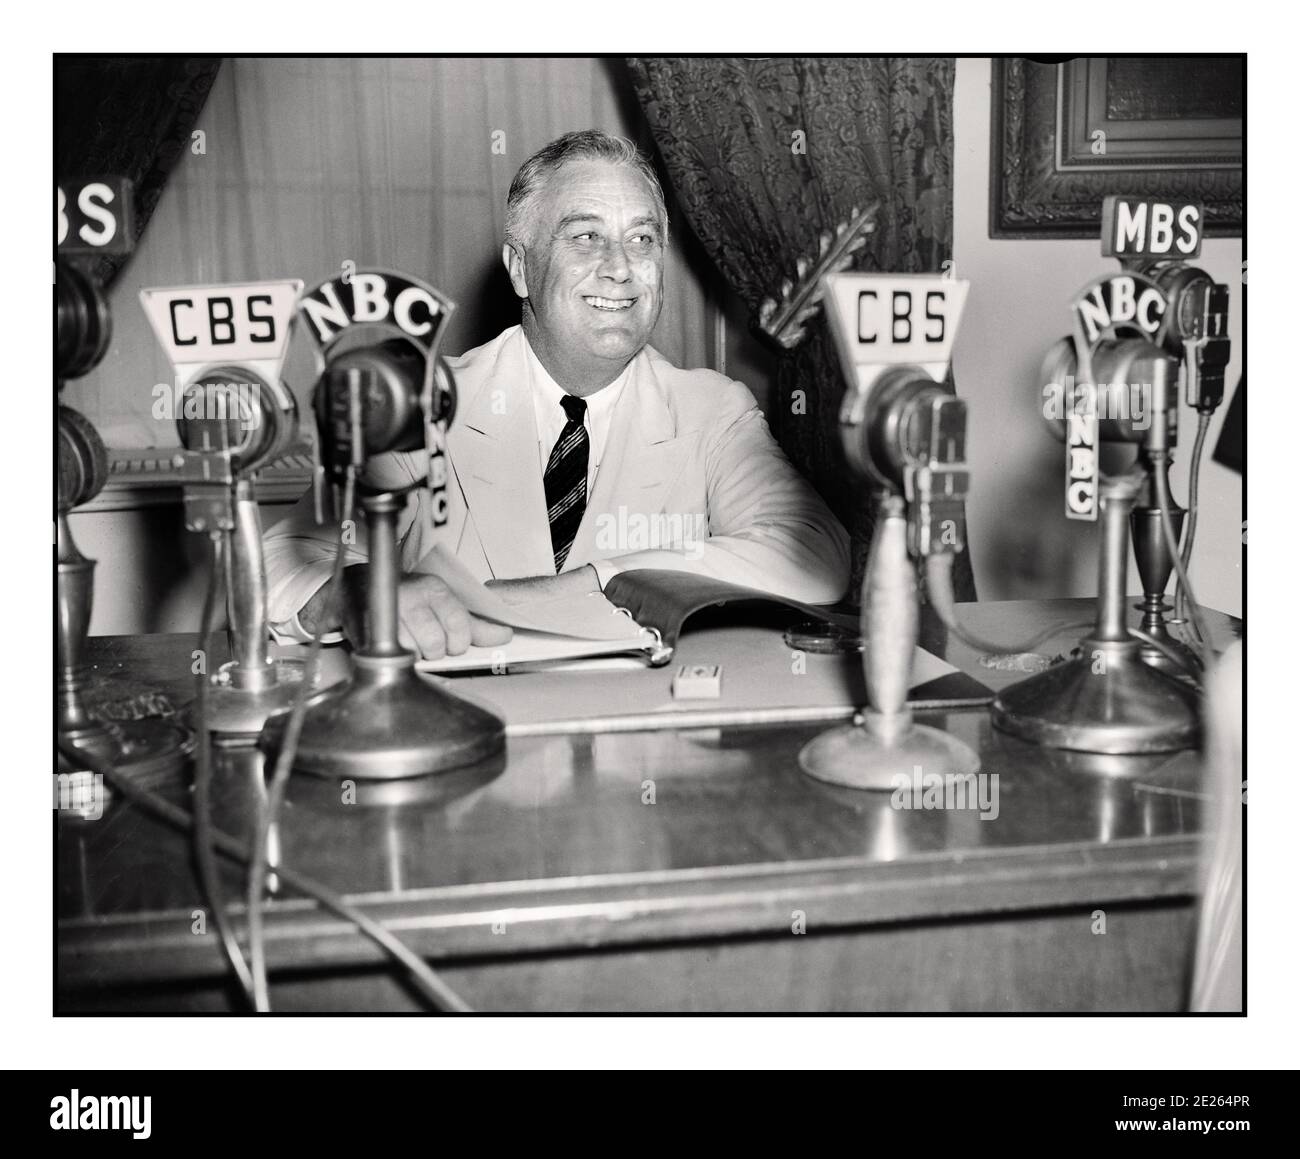 PRESIDENT ROOSEVELT 1930's FDR Franklin D. Roosevelt giving a radio broadcast (“fireside chat”) September 1934. On his desk CBS & NBC network broadcast microphones. Franklin Delano Roosevelt Sr., often referred to by his initials FDR, was an American statesman and political leader who served as the 32nd President of the United States from 1933 until his death in 1945. Stock Photo